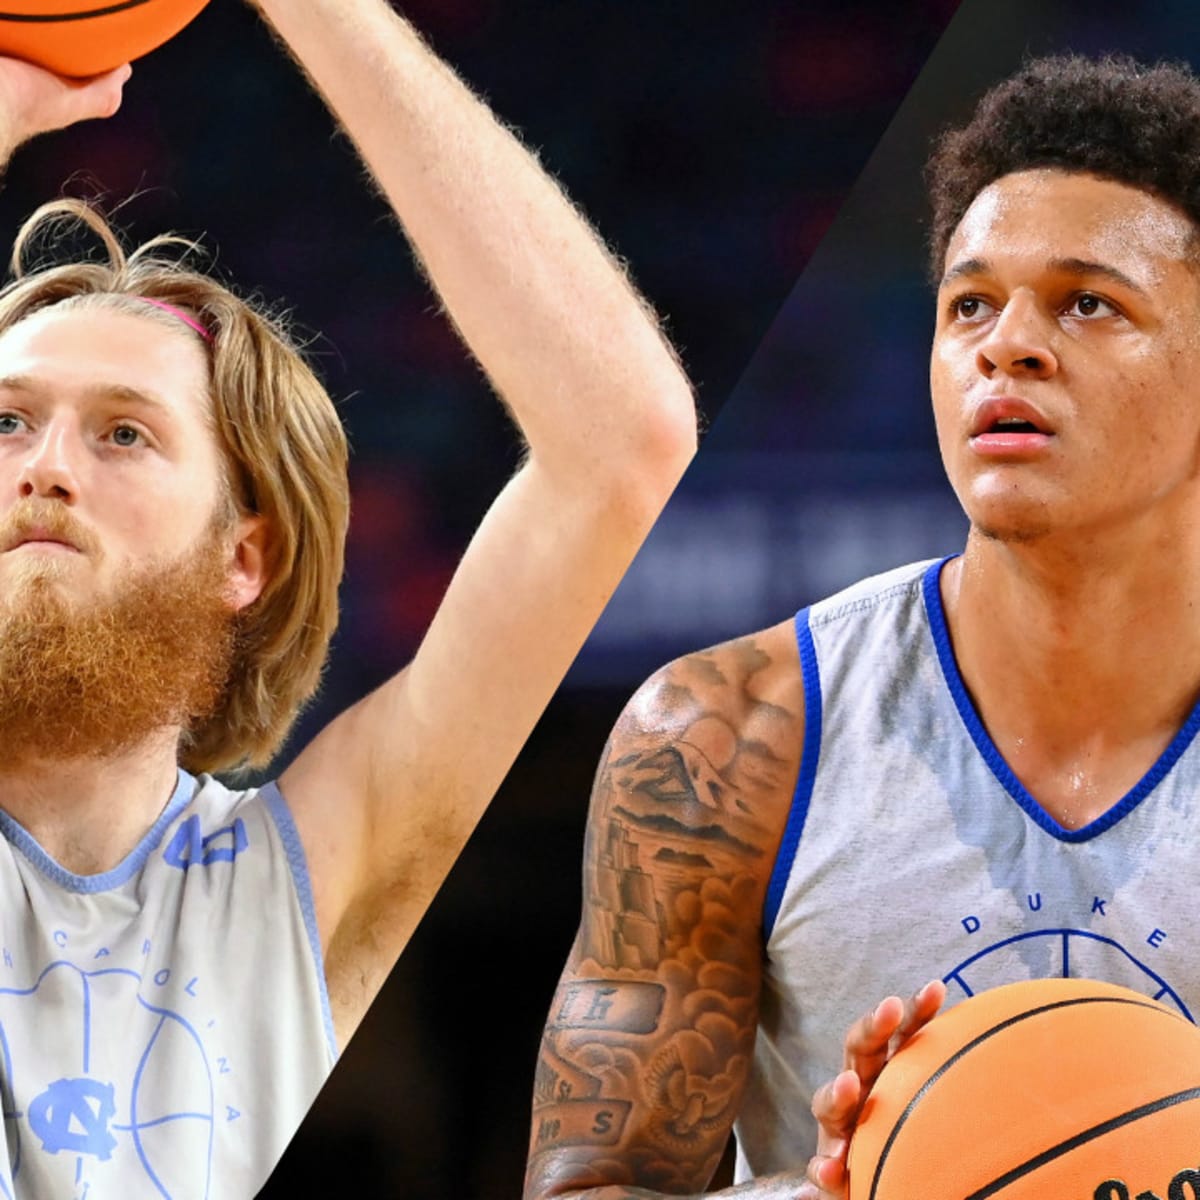 NCAA Mens Basketball Tournament Final Four How to watch, betting odds, TV channel, starting lineups, photo gallery + more for No. 8 North Carolina vs